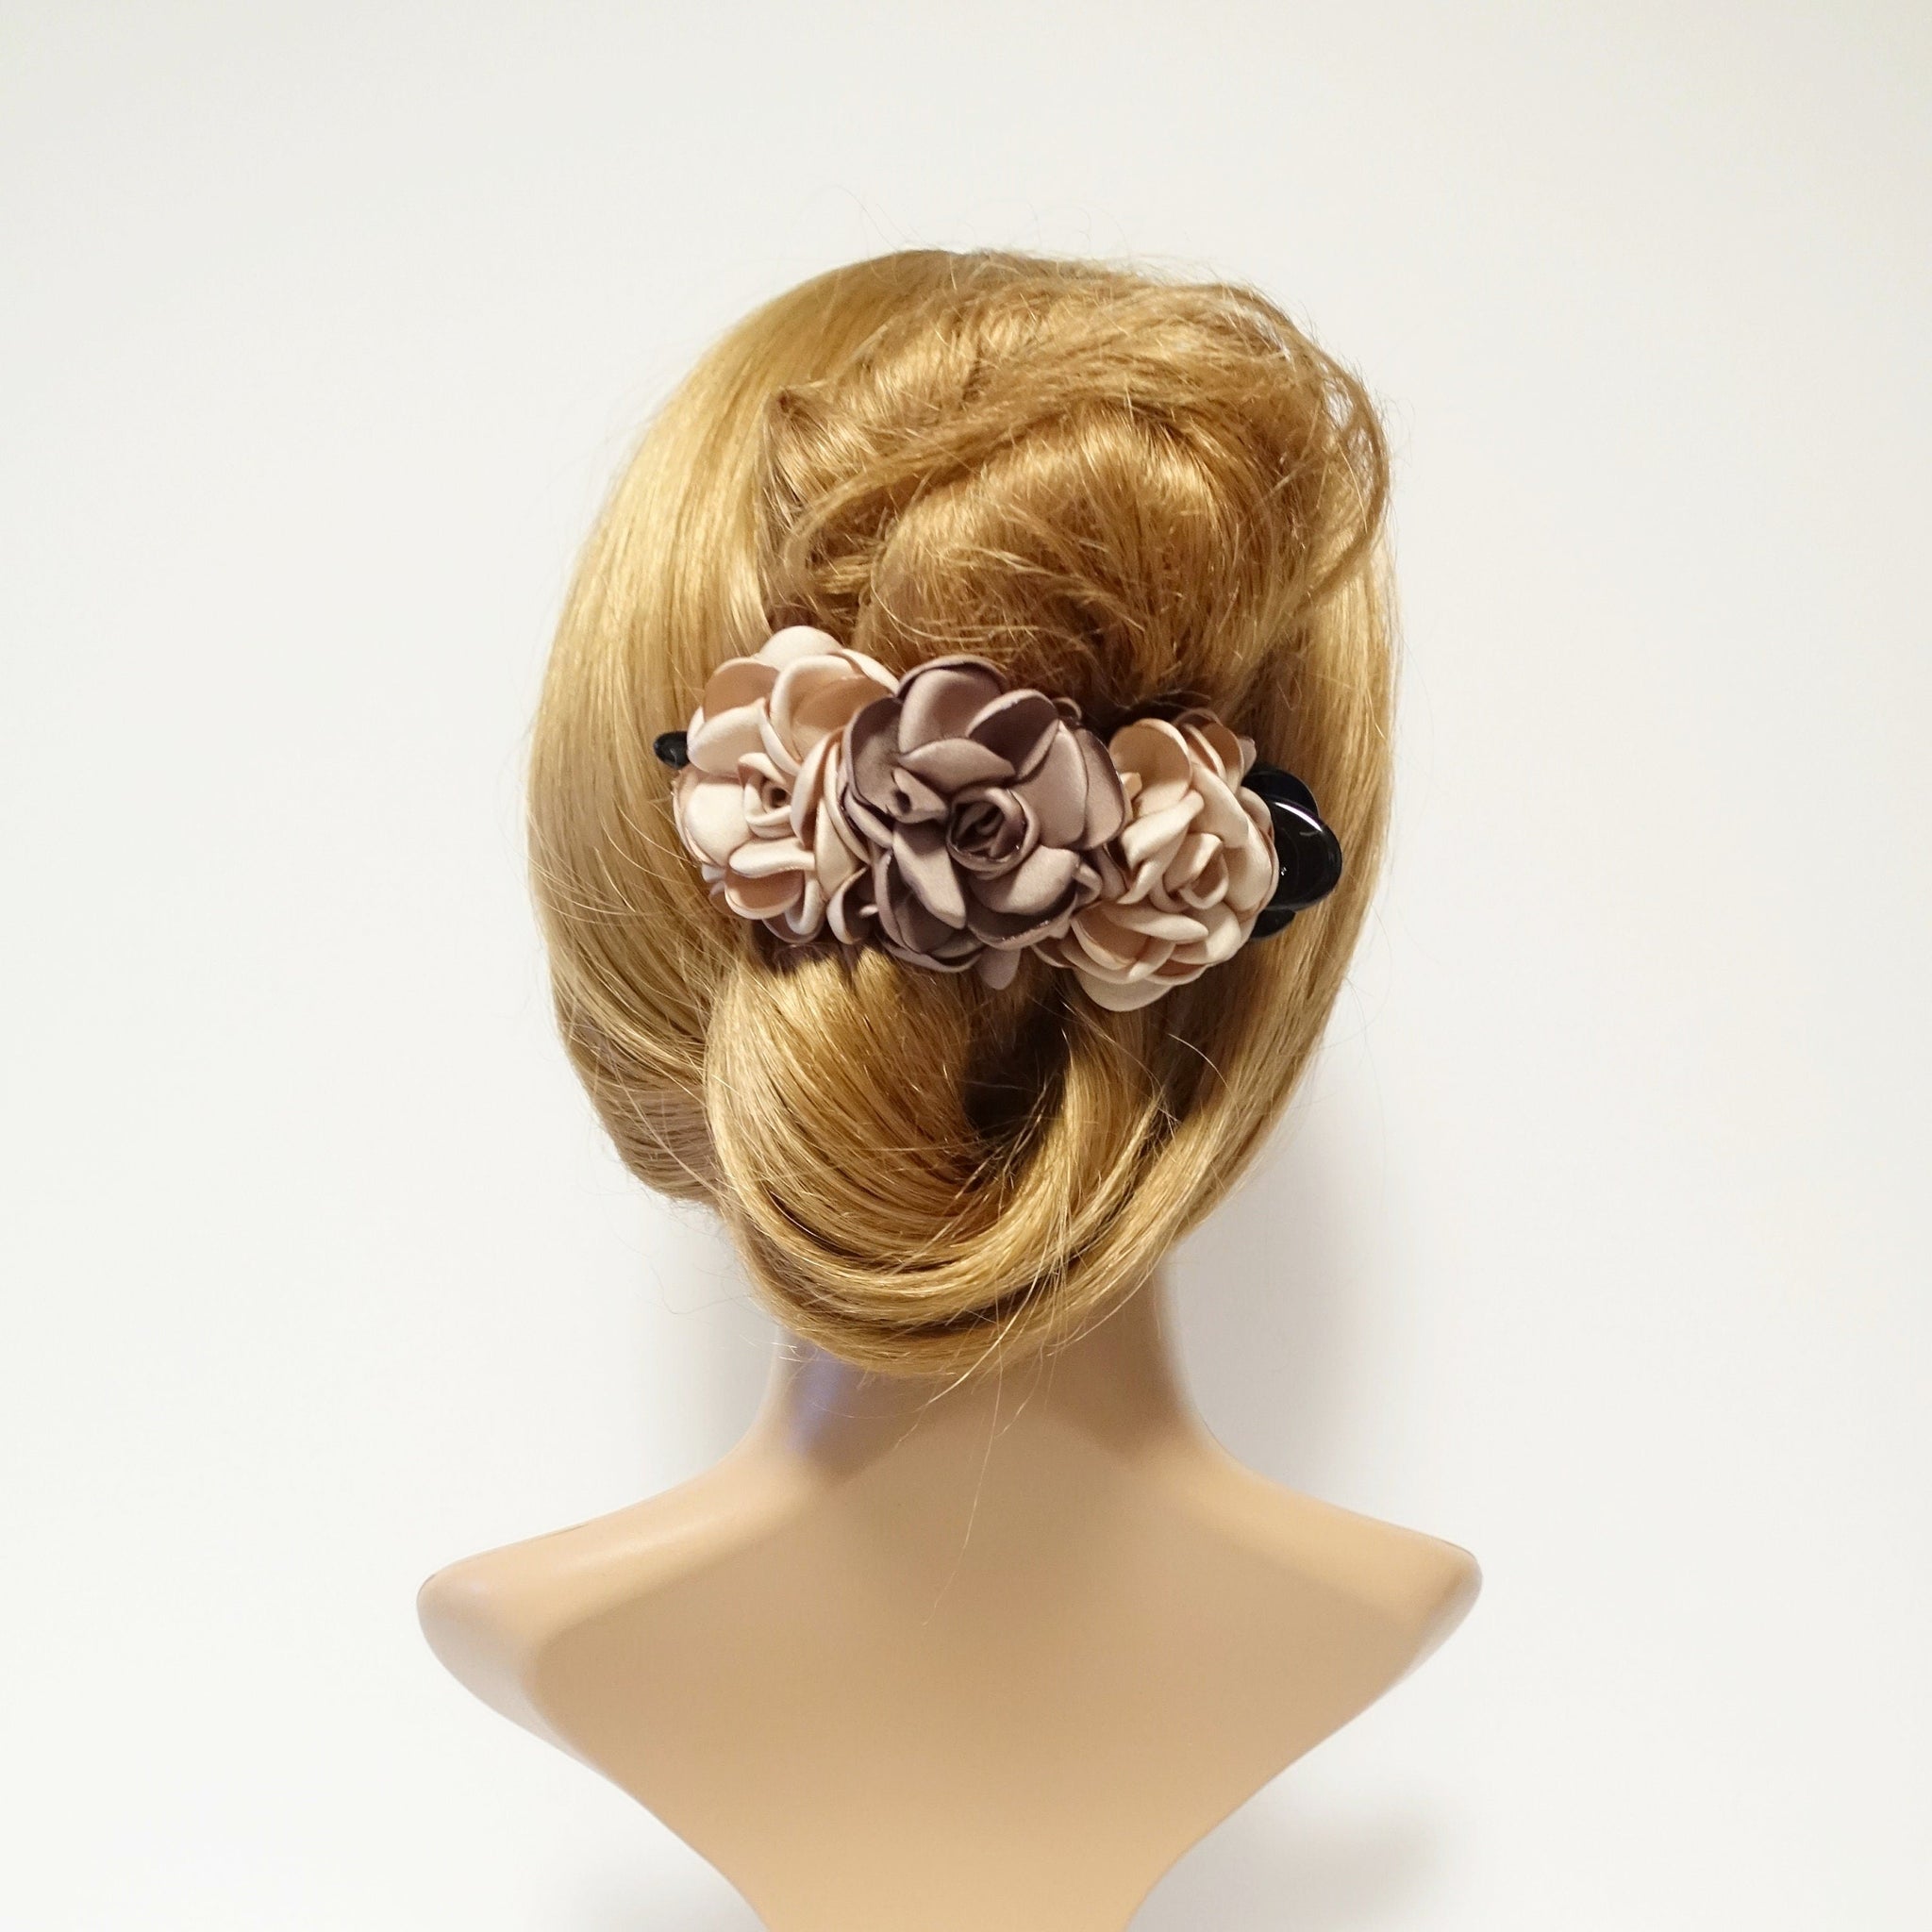 veryshine.com Hair Claw Beige Rose Decorative 6 Prong Side hair Slide Jaw Claw Clip Clamp Flower Hair Accessories